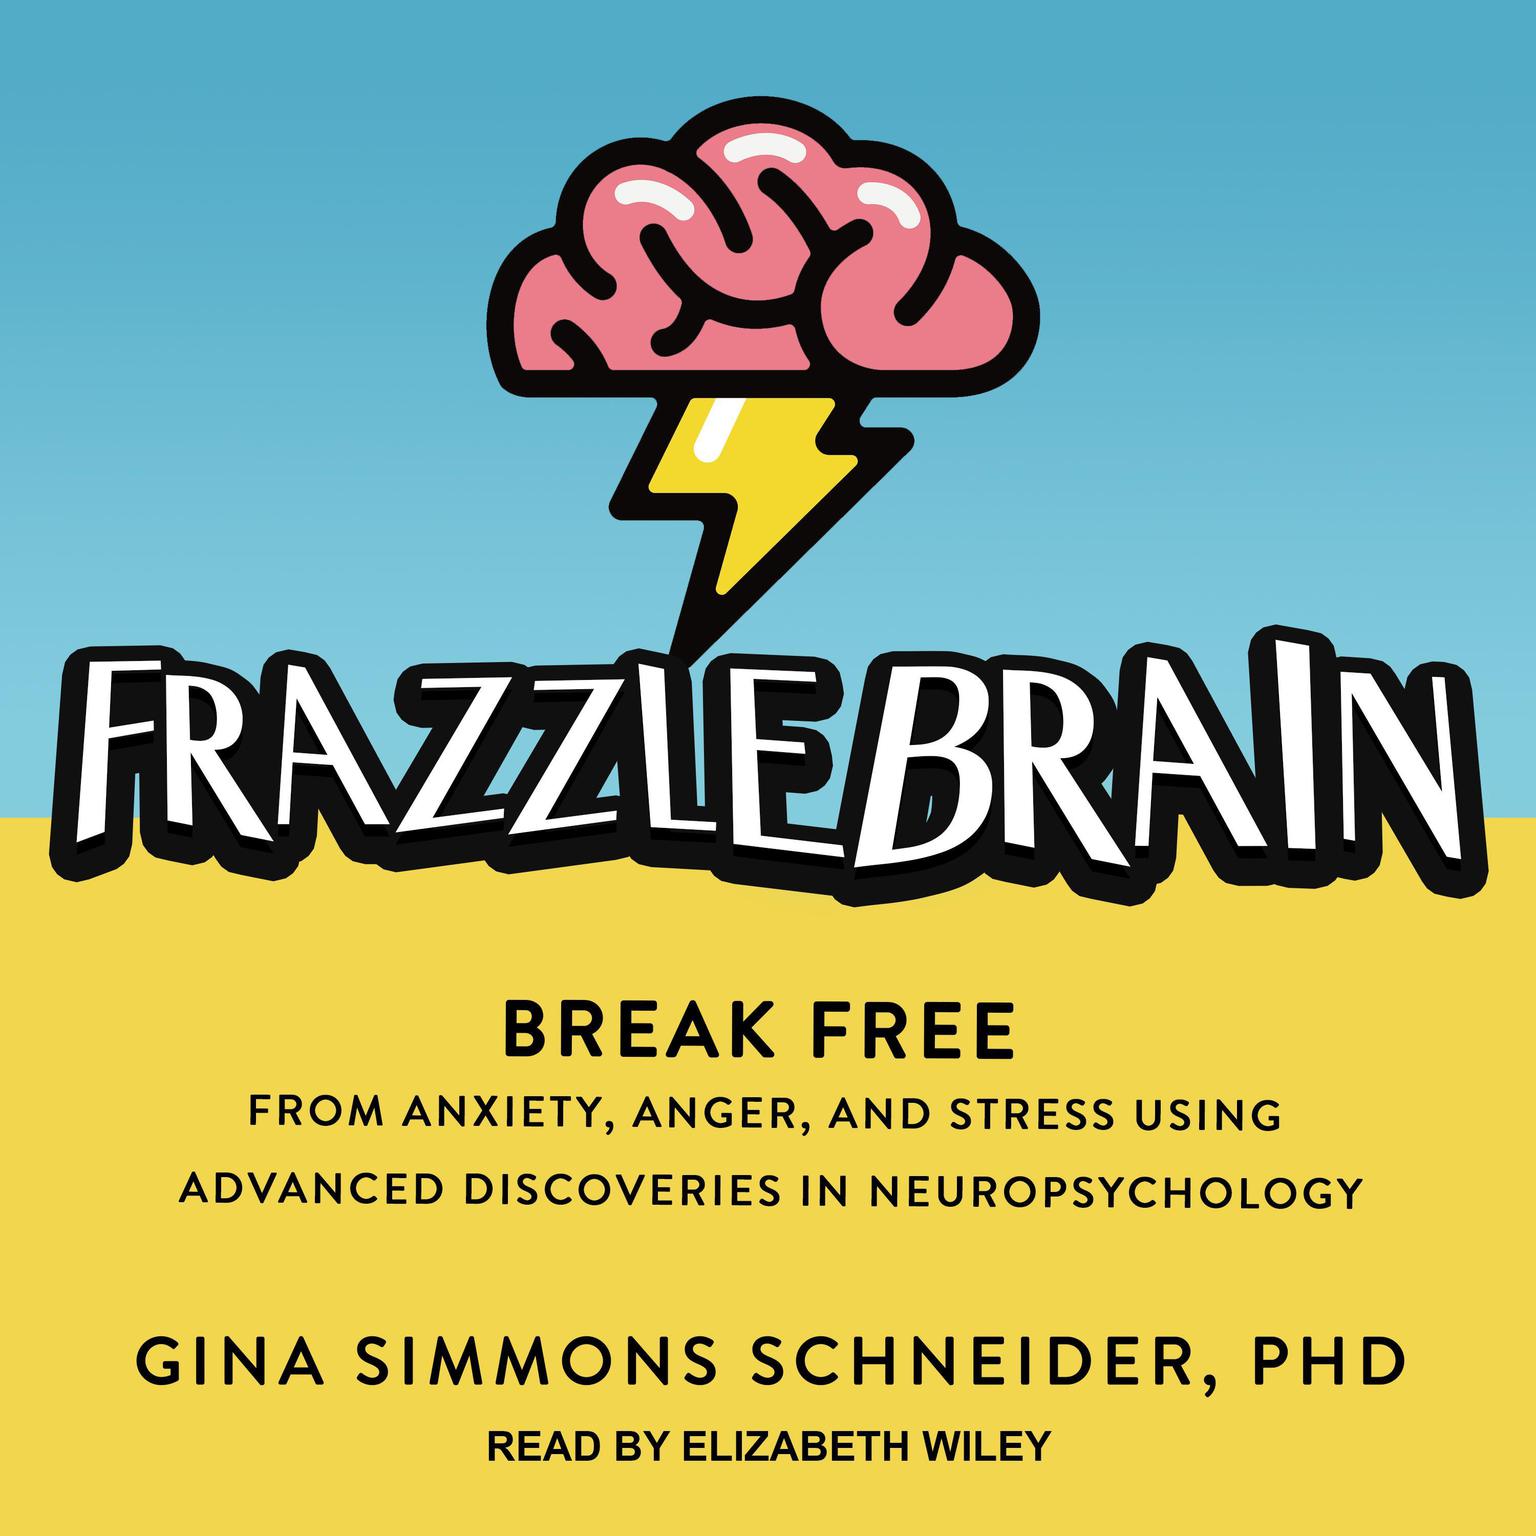 Frazzlebrain: Break Free from Anxiety, Anger, and Stress Using Advanced Discoveries in Neuropsychology Audiobook, by Gina Simmons Schneider